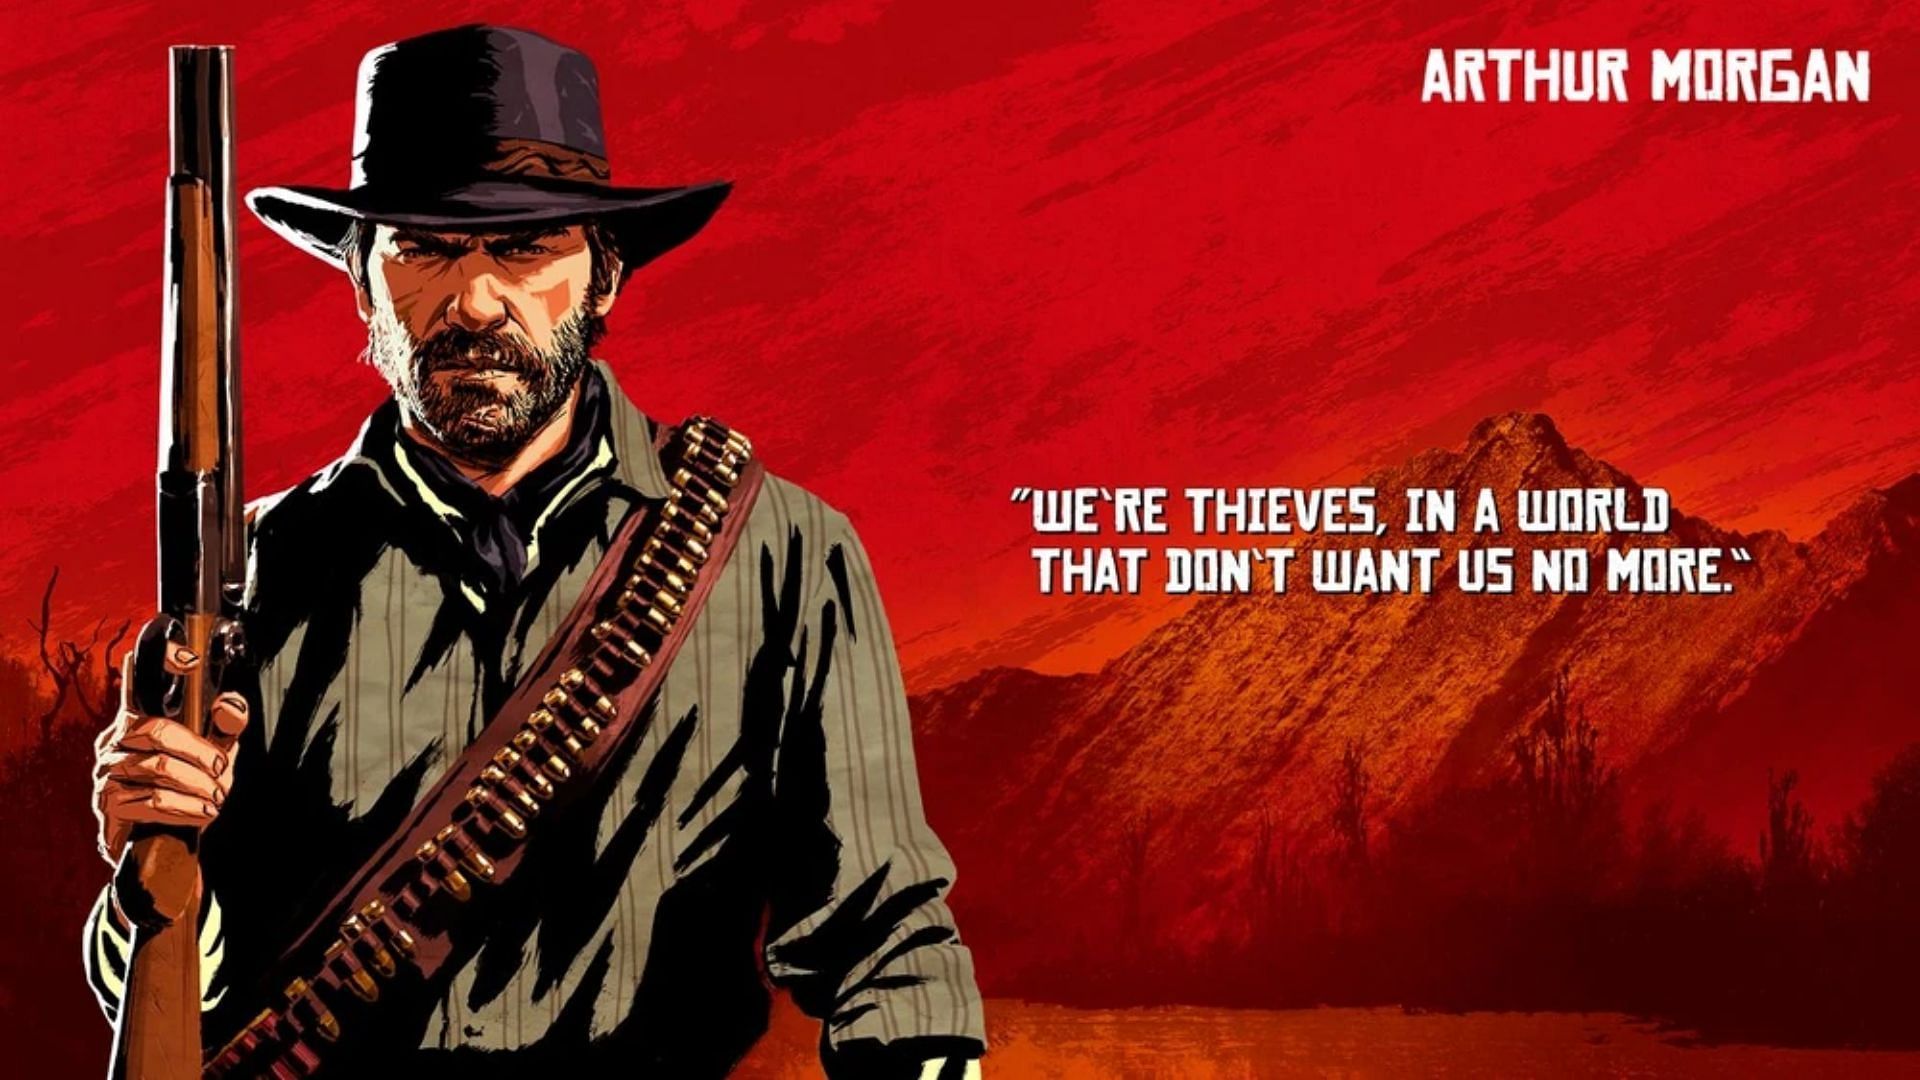 &ldquo;We can&rsquo;t change what&rsquo;s done, we can only move on.&rdquo; (Image via Rockstar Games)